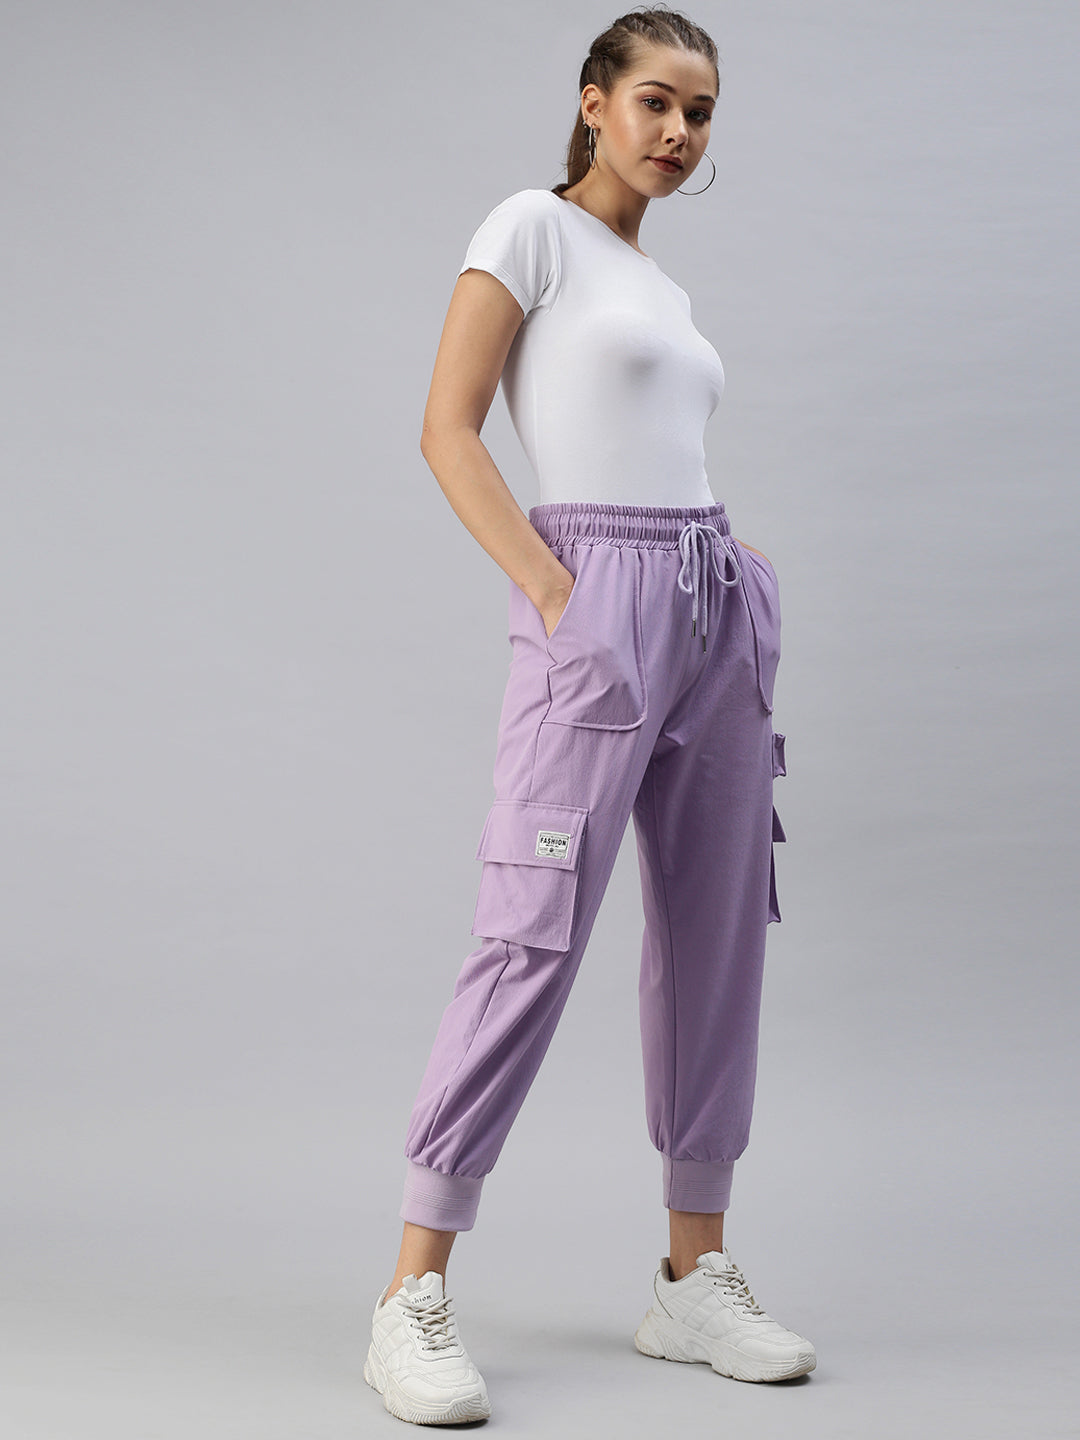 Women's Lavender Solid Joggers Track Pant